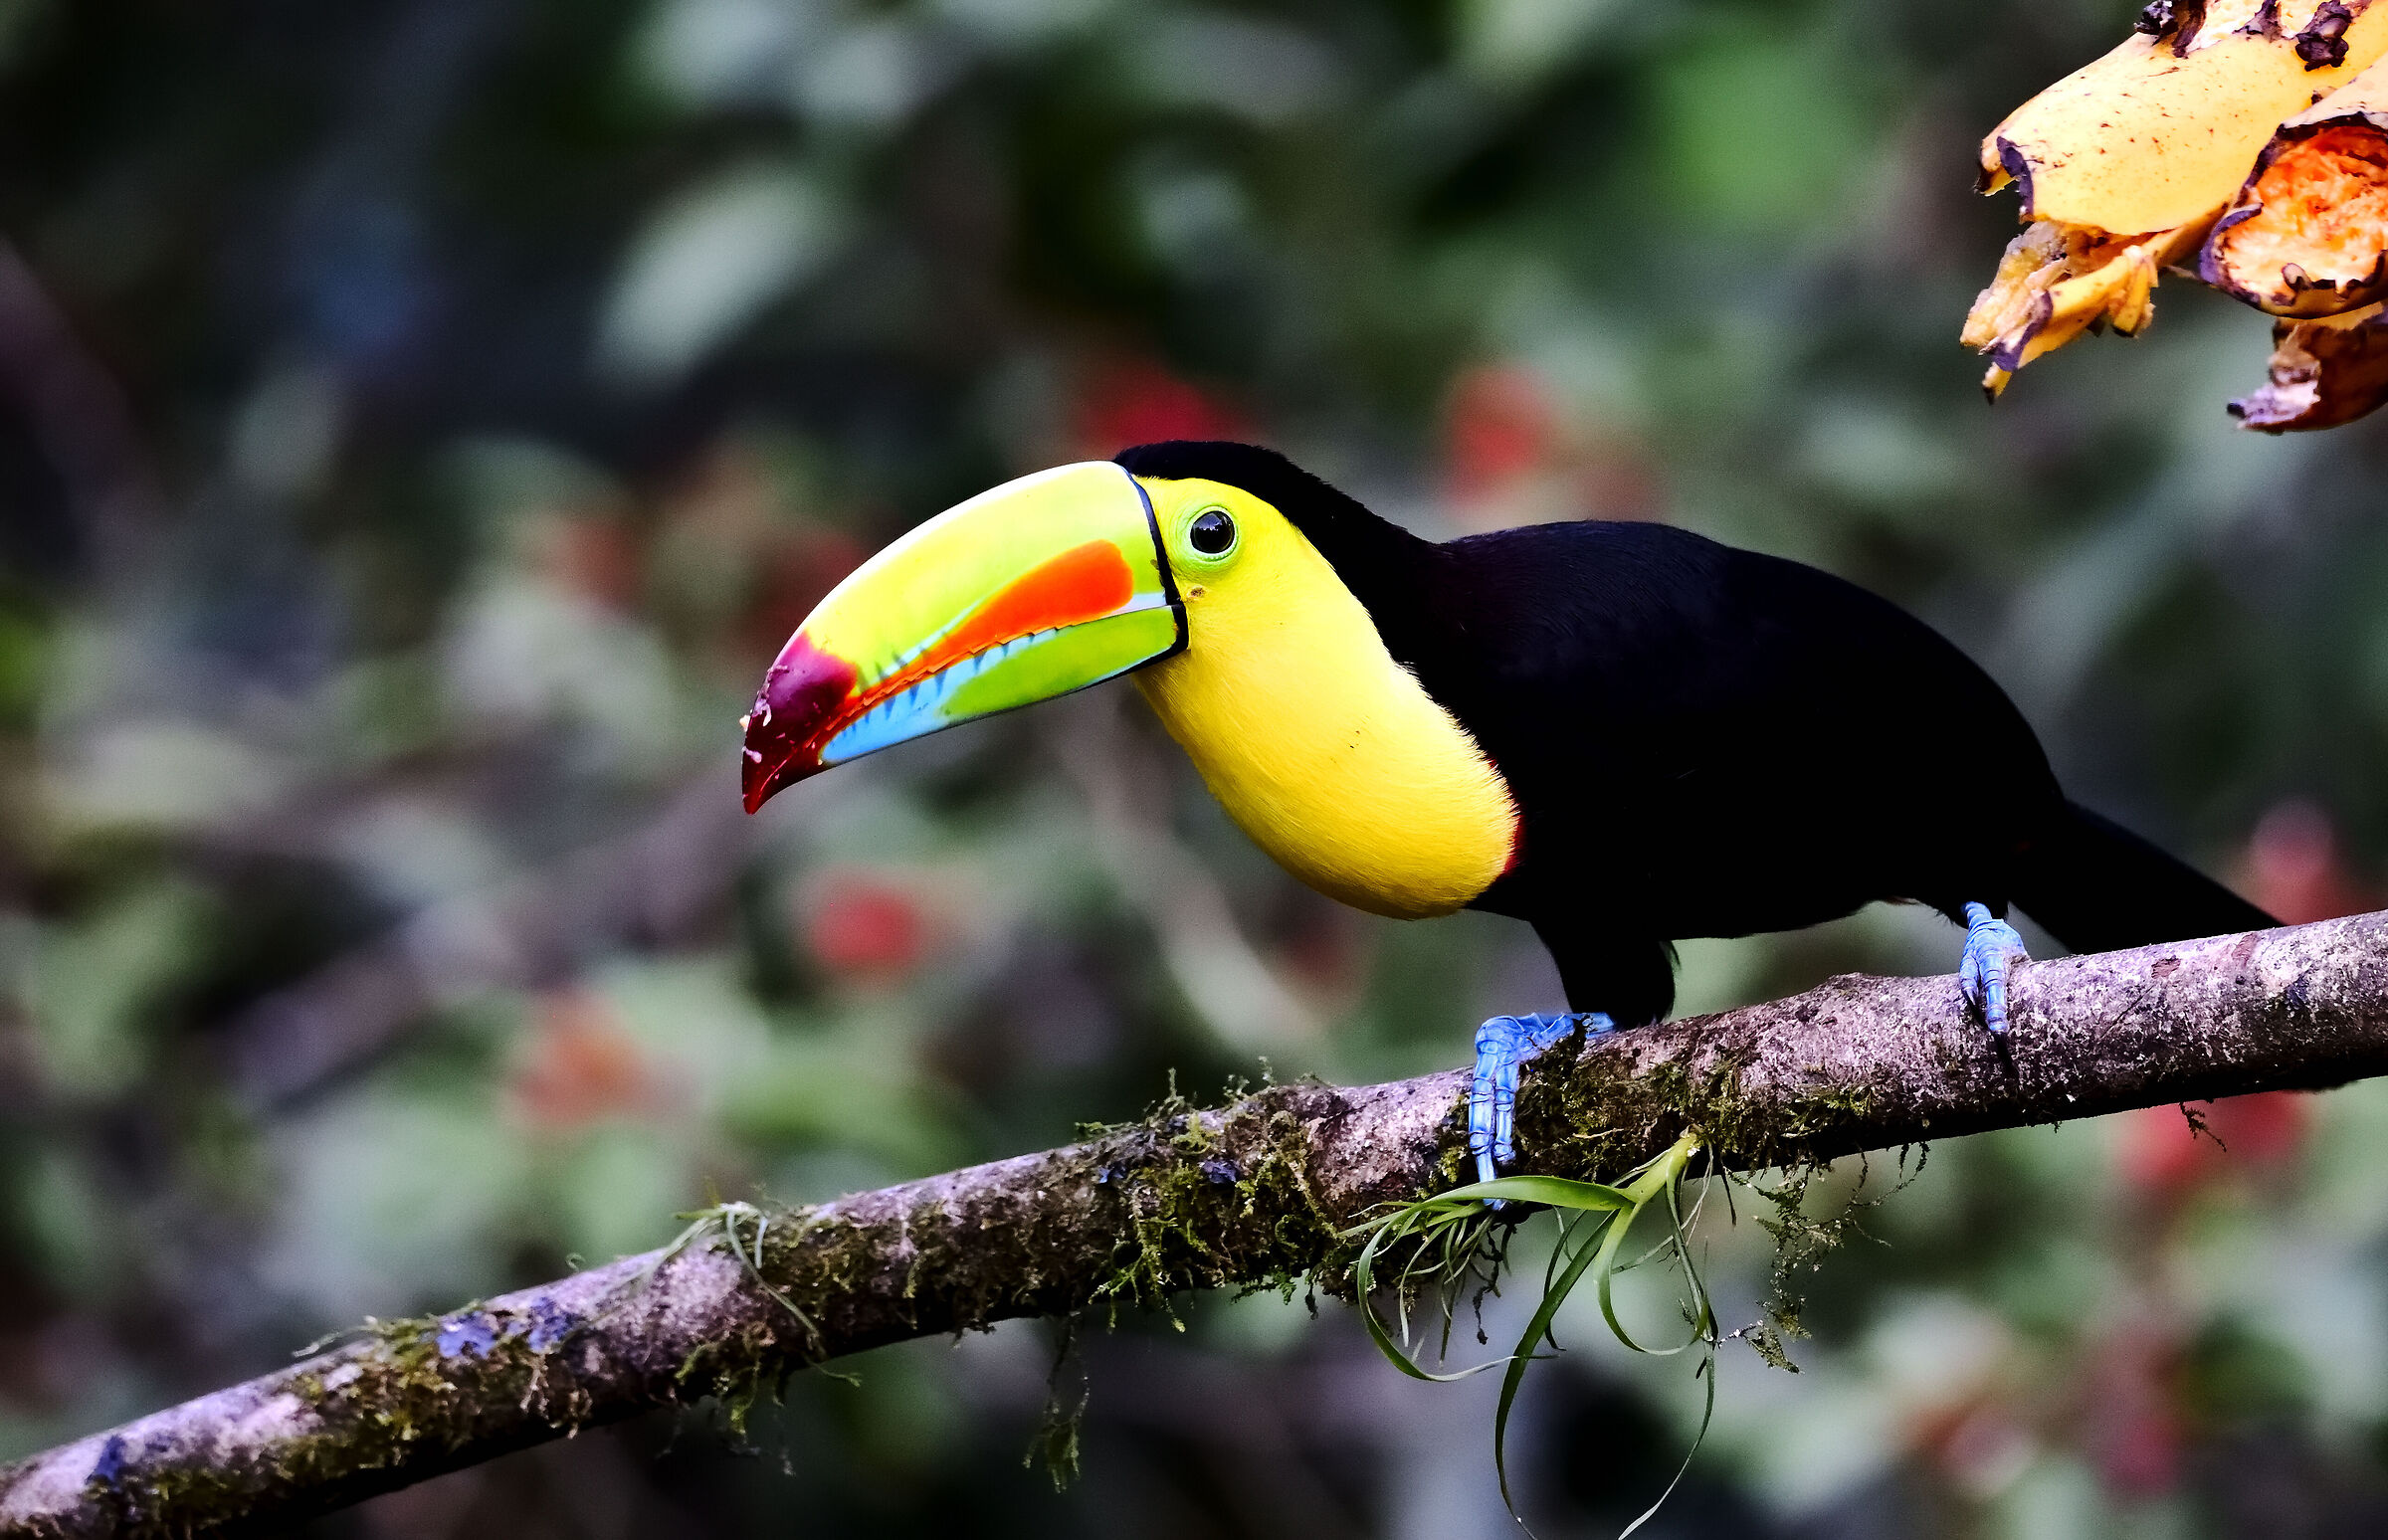 A colorful Keel-billed toucans posing on a branch...